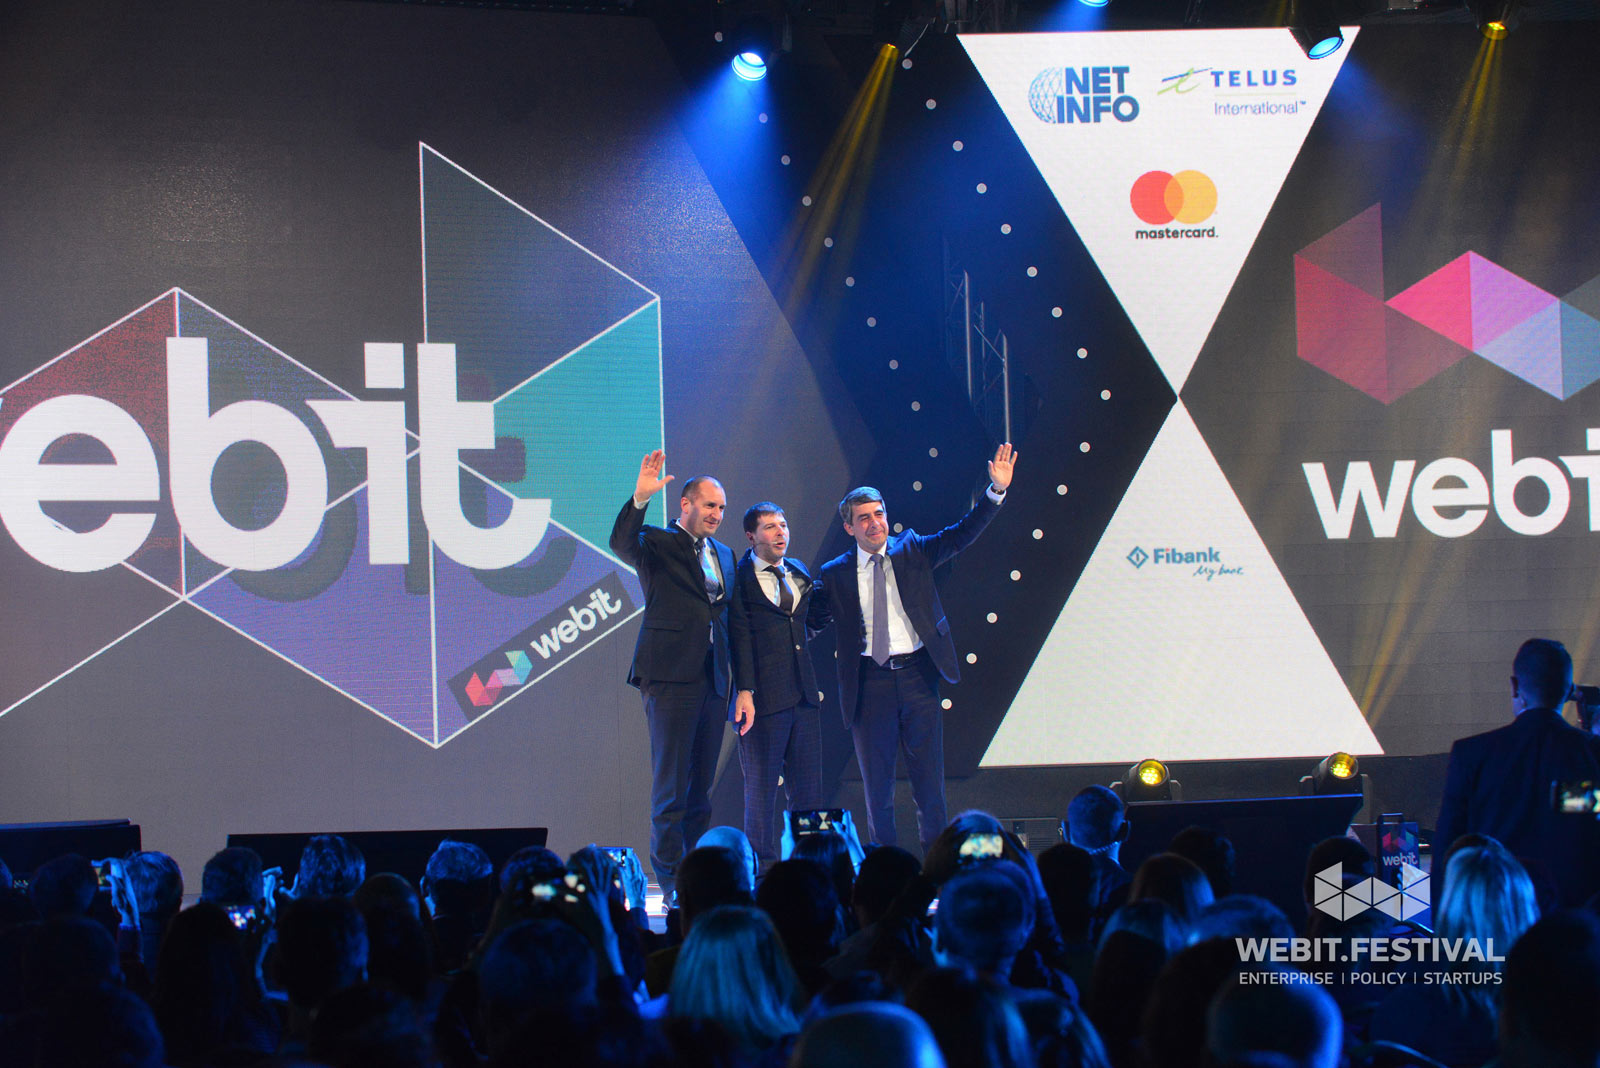 Plamen Russev, the former and the present Presidents of Bulgaria demonstrating continuity in politics on Webit's stage